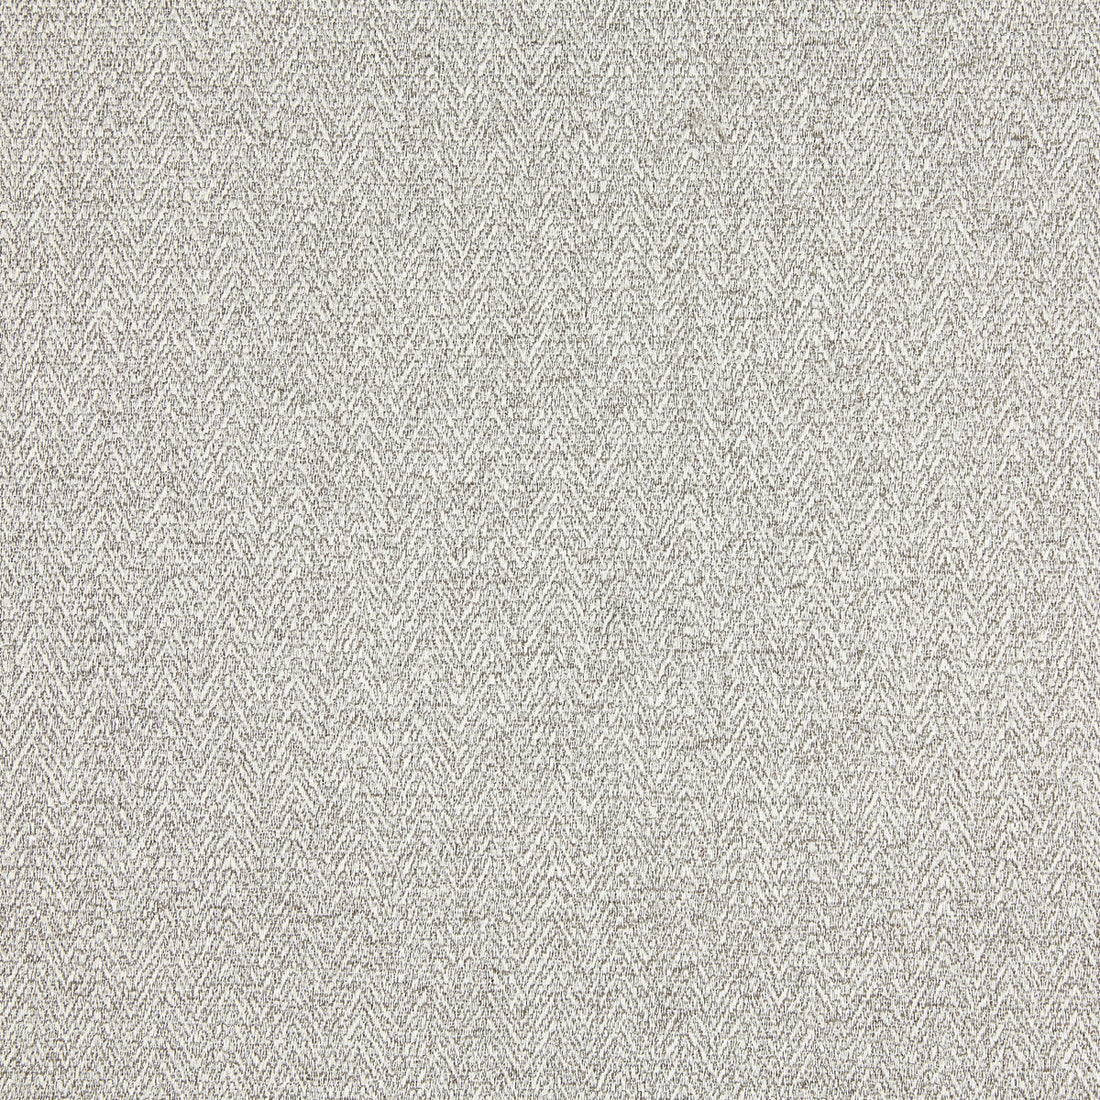 Brummell fabric in 7 color - pattern LZ-30363.07.0 - by Kravet Design in the Lizzo collection